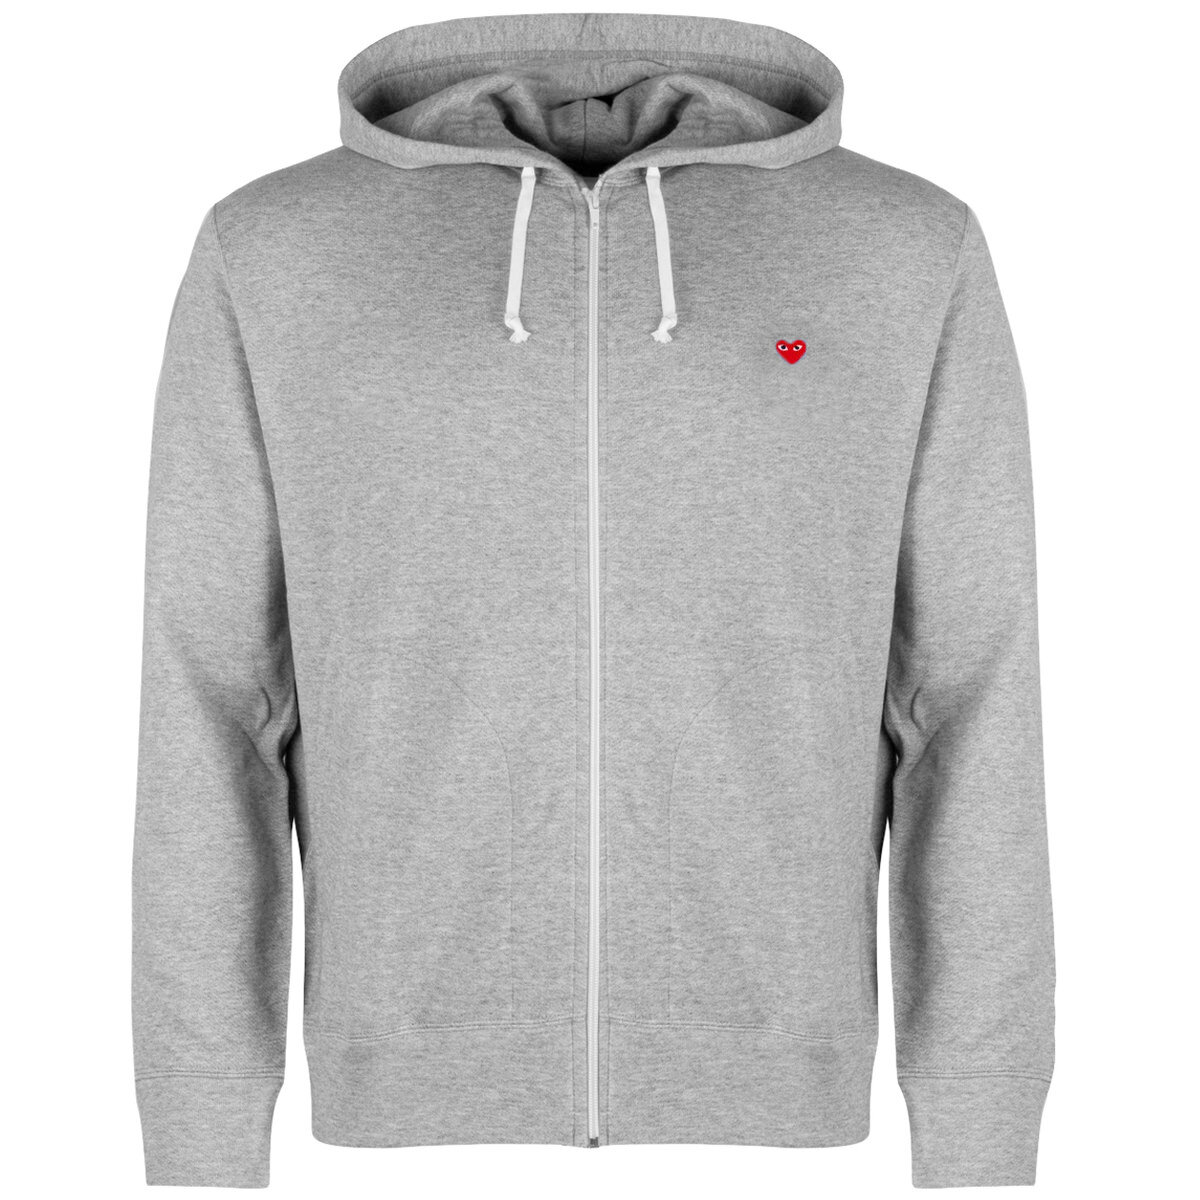 Small Red Heart Hoodie Xxl Grey